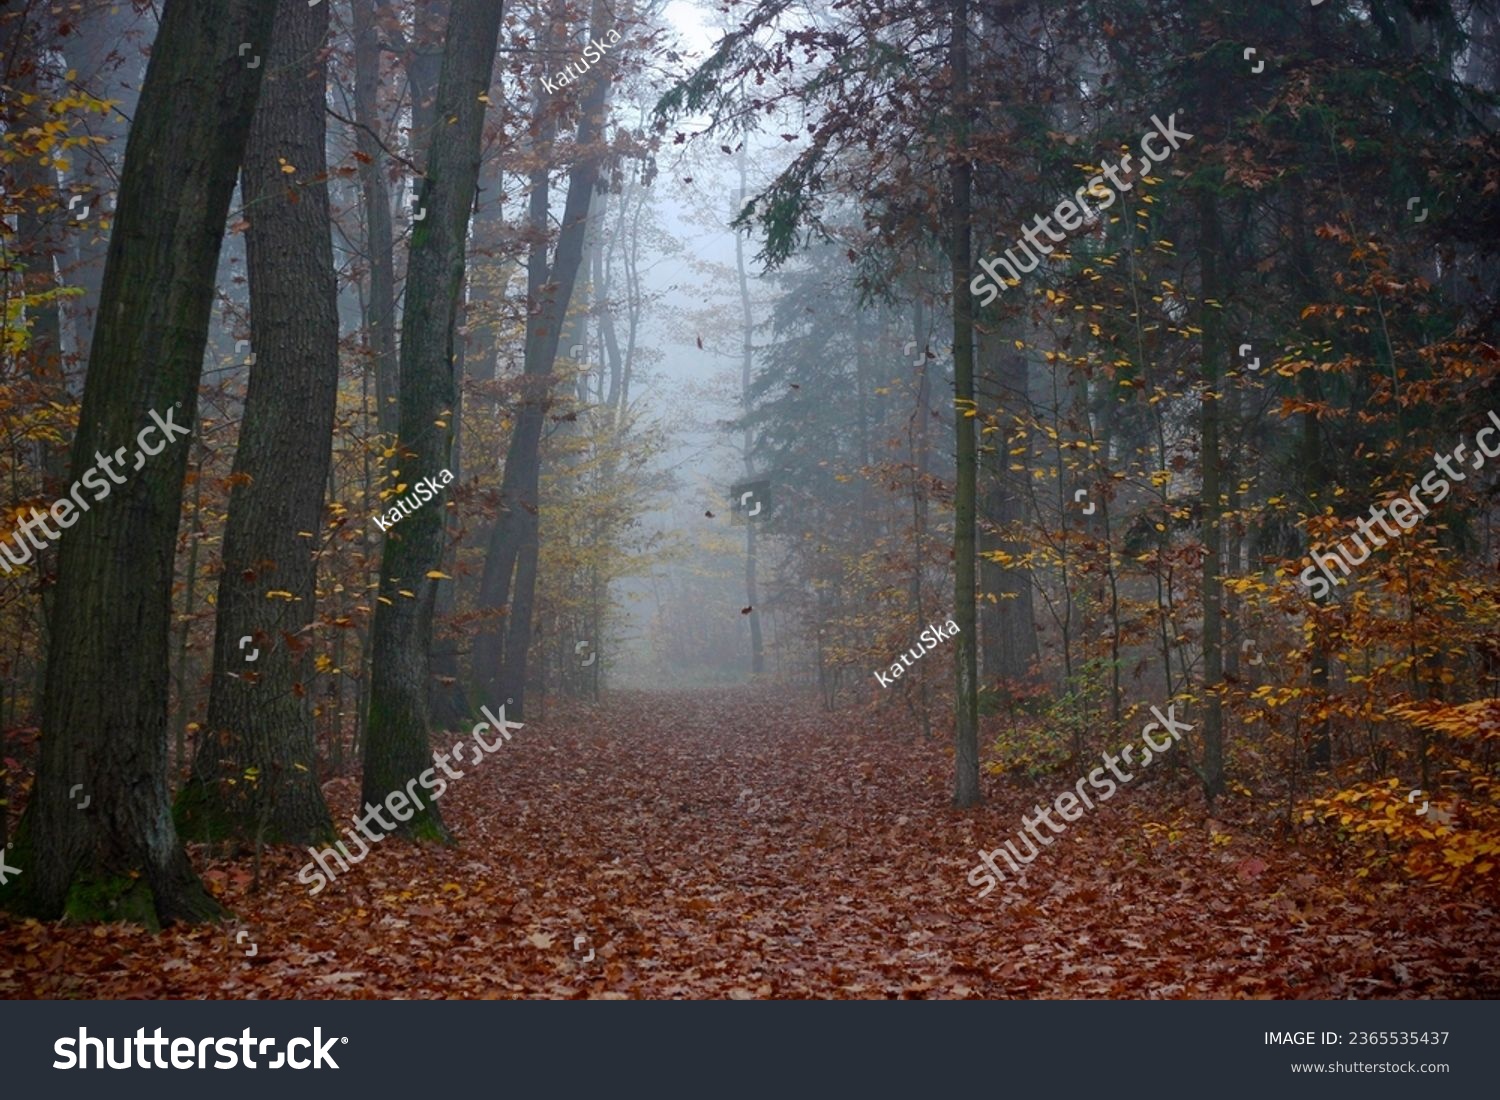 Beautiful mystical autumn forest in the fog. Fairy, autumnal mysterious trees with yellow and orange leaves. Scenery with path in a dreamy foggy forest. Nature background #2365535437